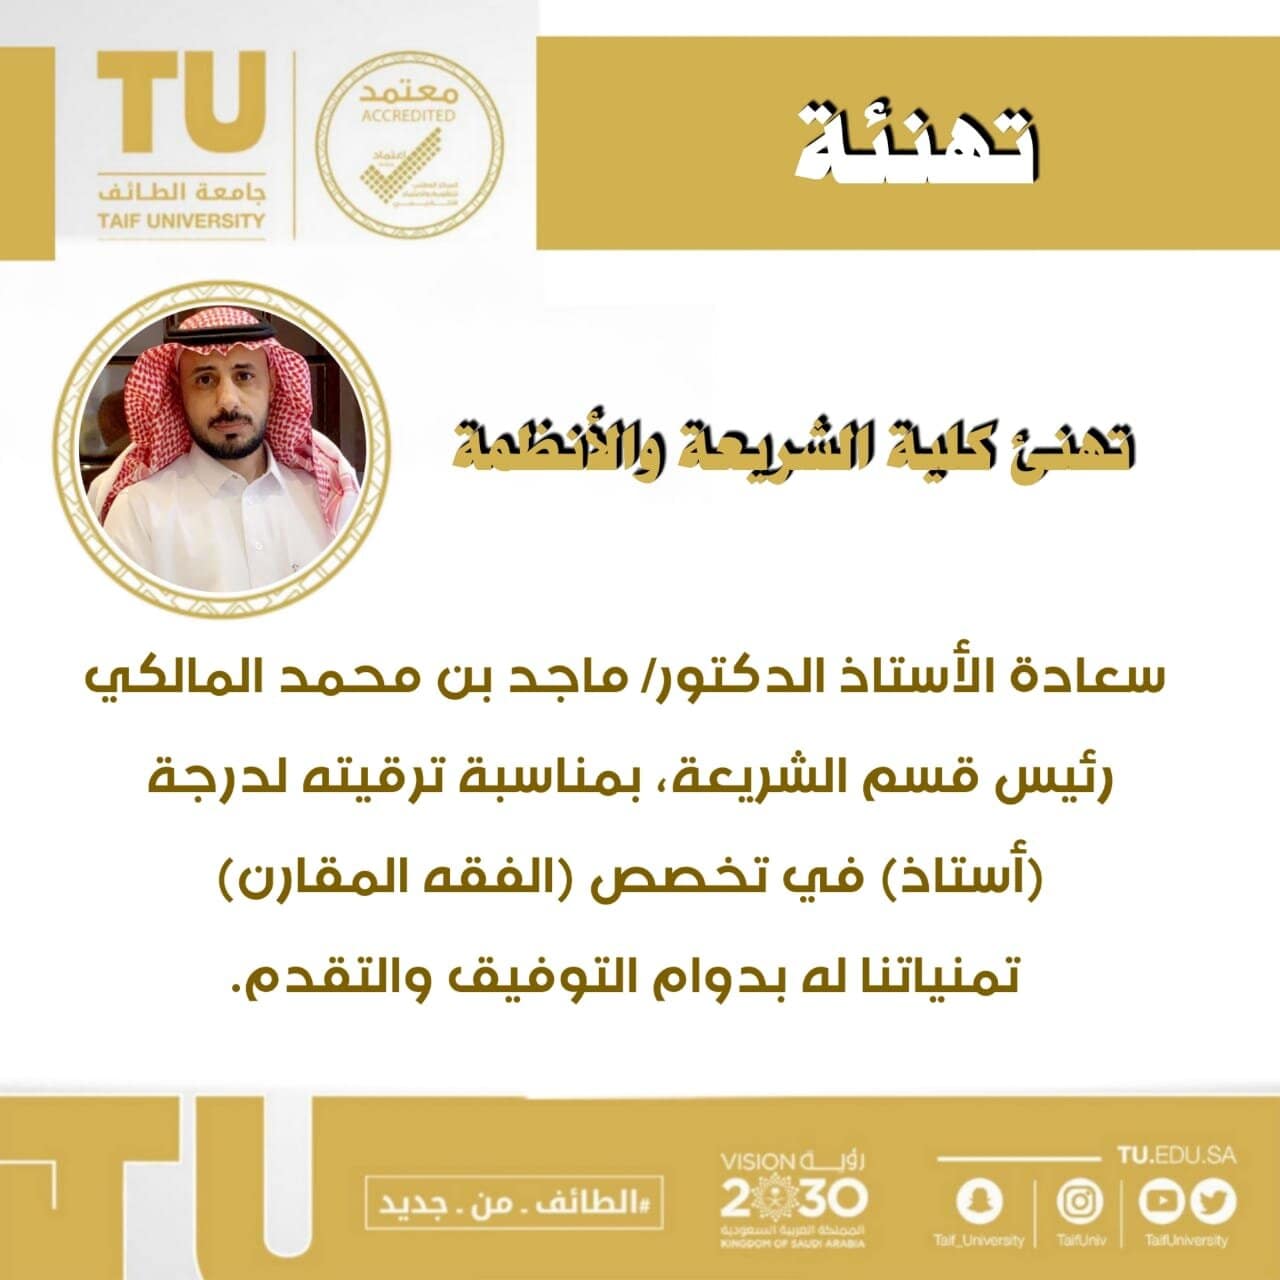 The College of Sharia and Law congratulates Dr. Majed Al-Malki on the occasion of his promotion to a degree of Professor in Comparative Jurisprudence.